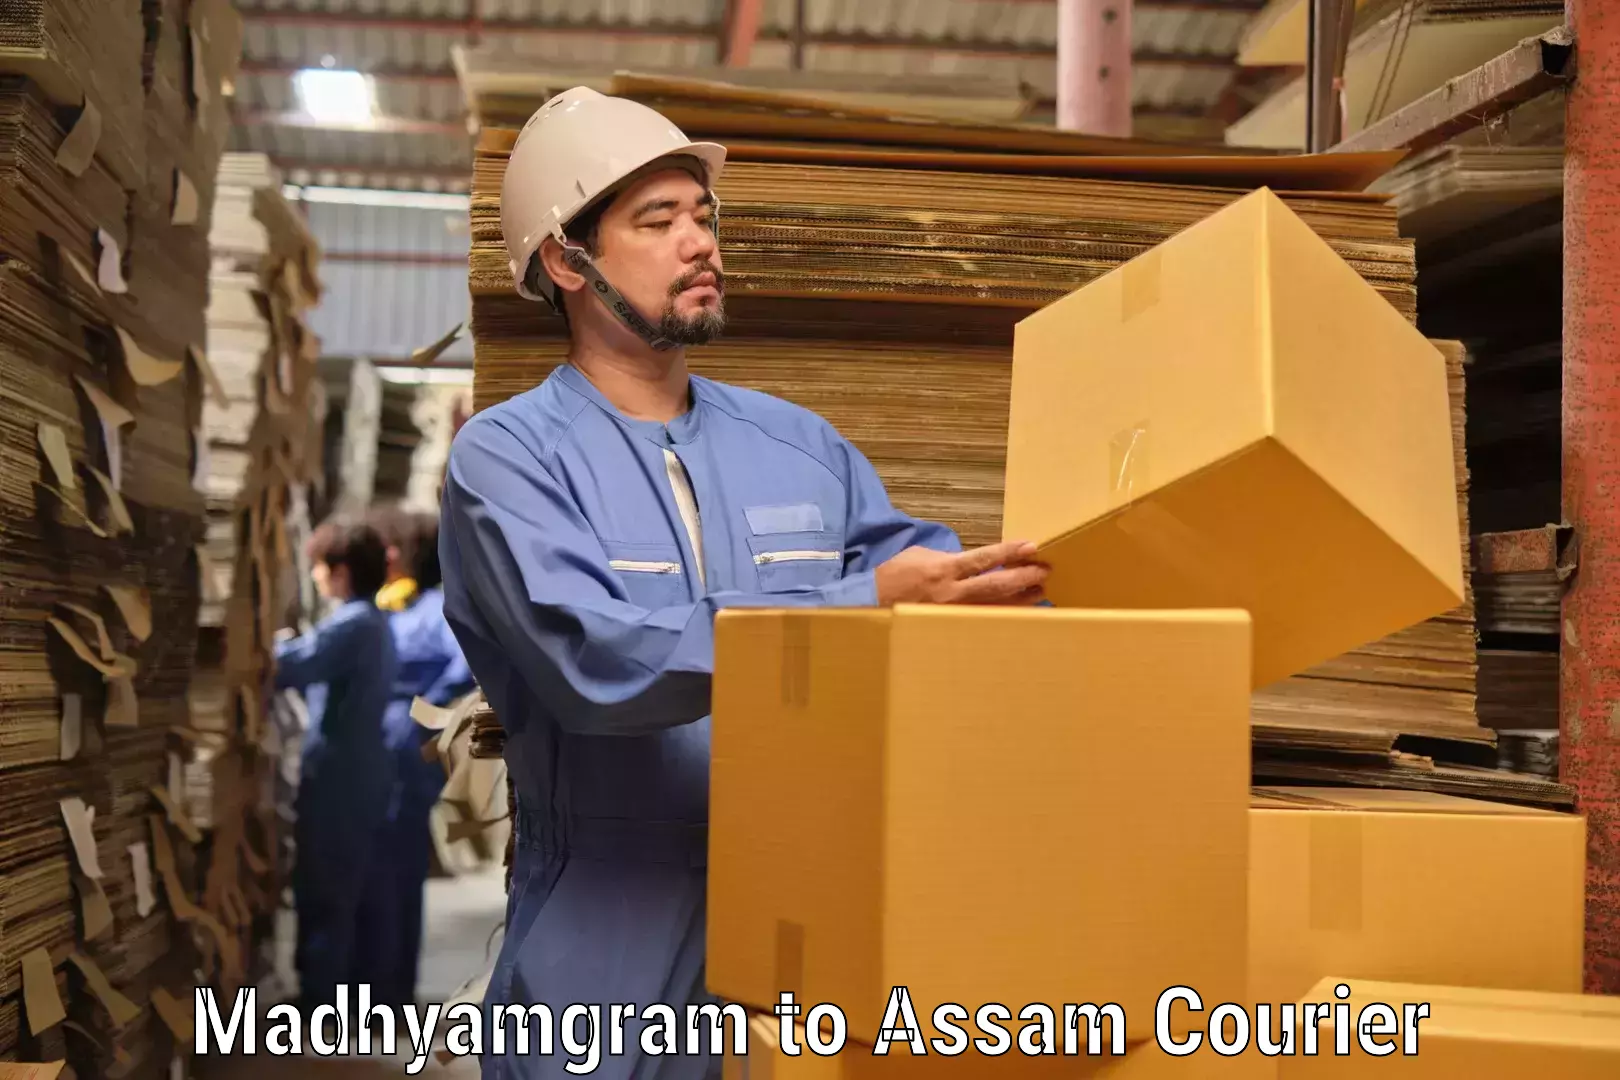 Customer-oriented courier services in Madhyamgram to Assam